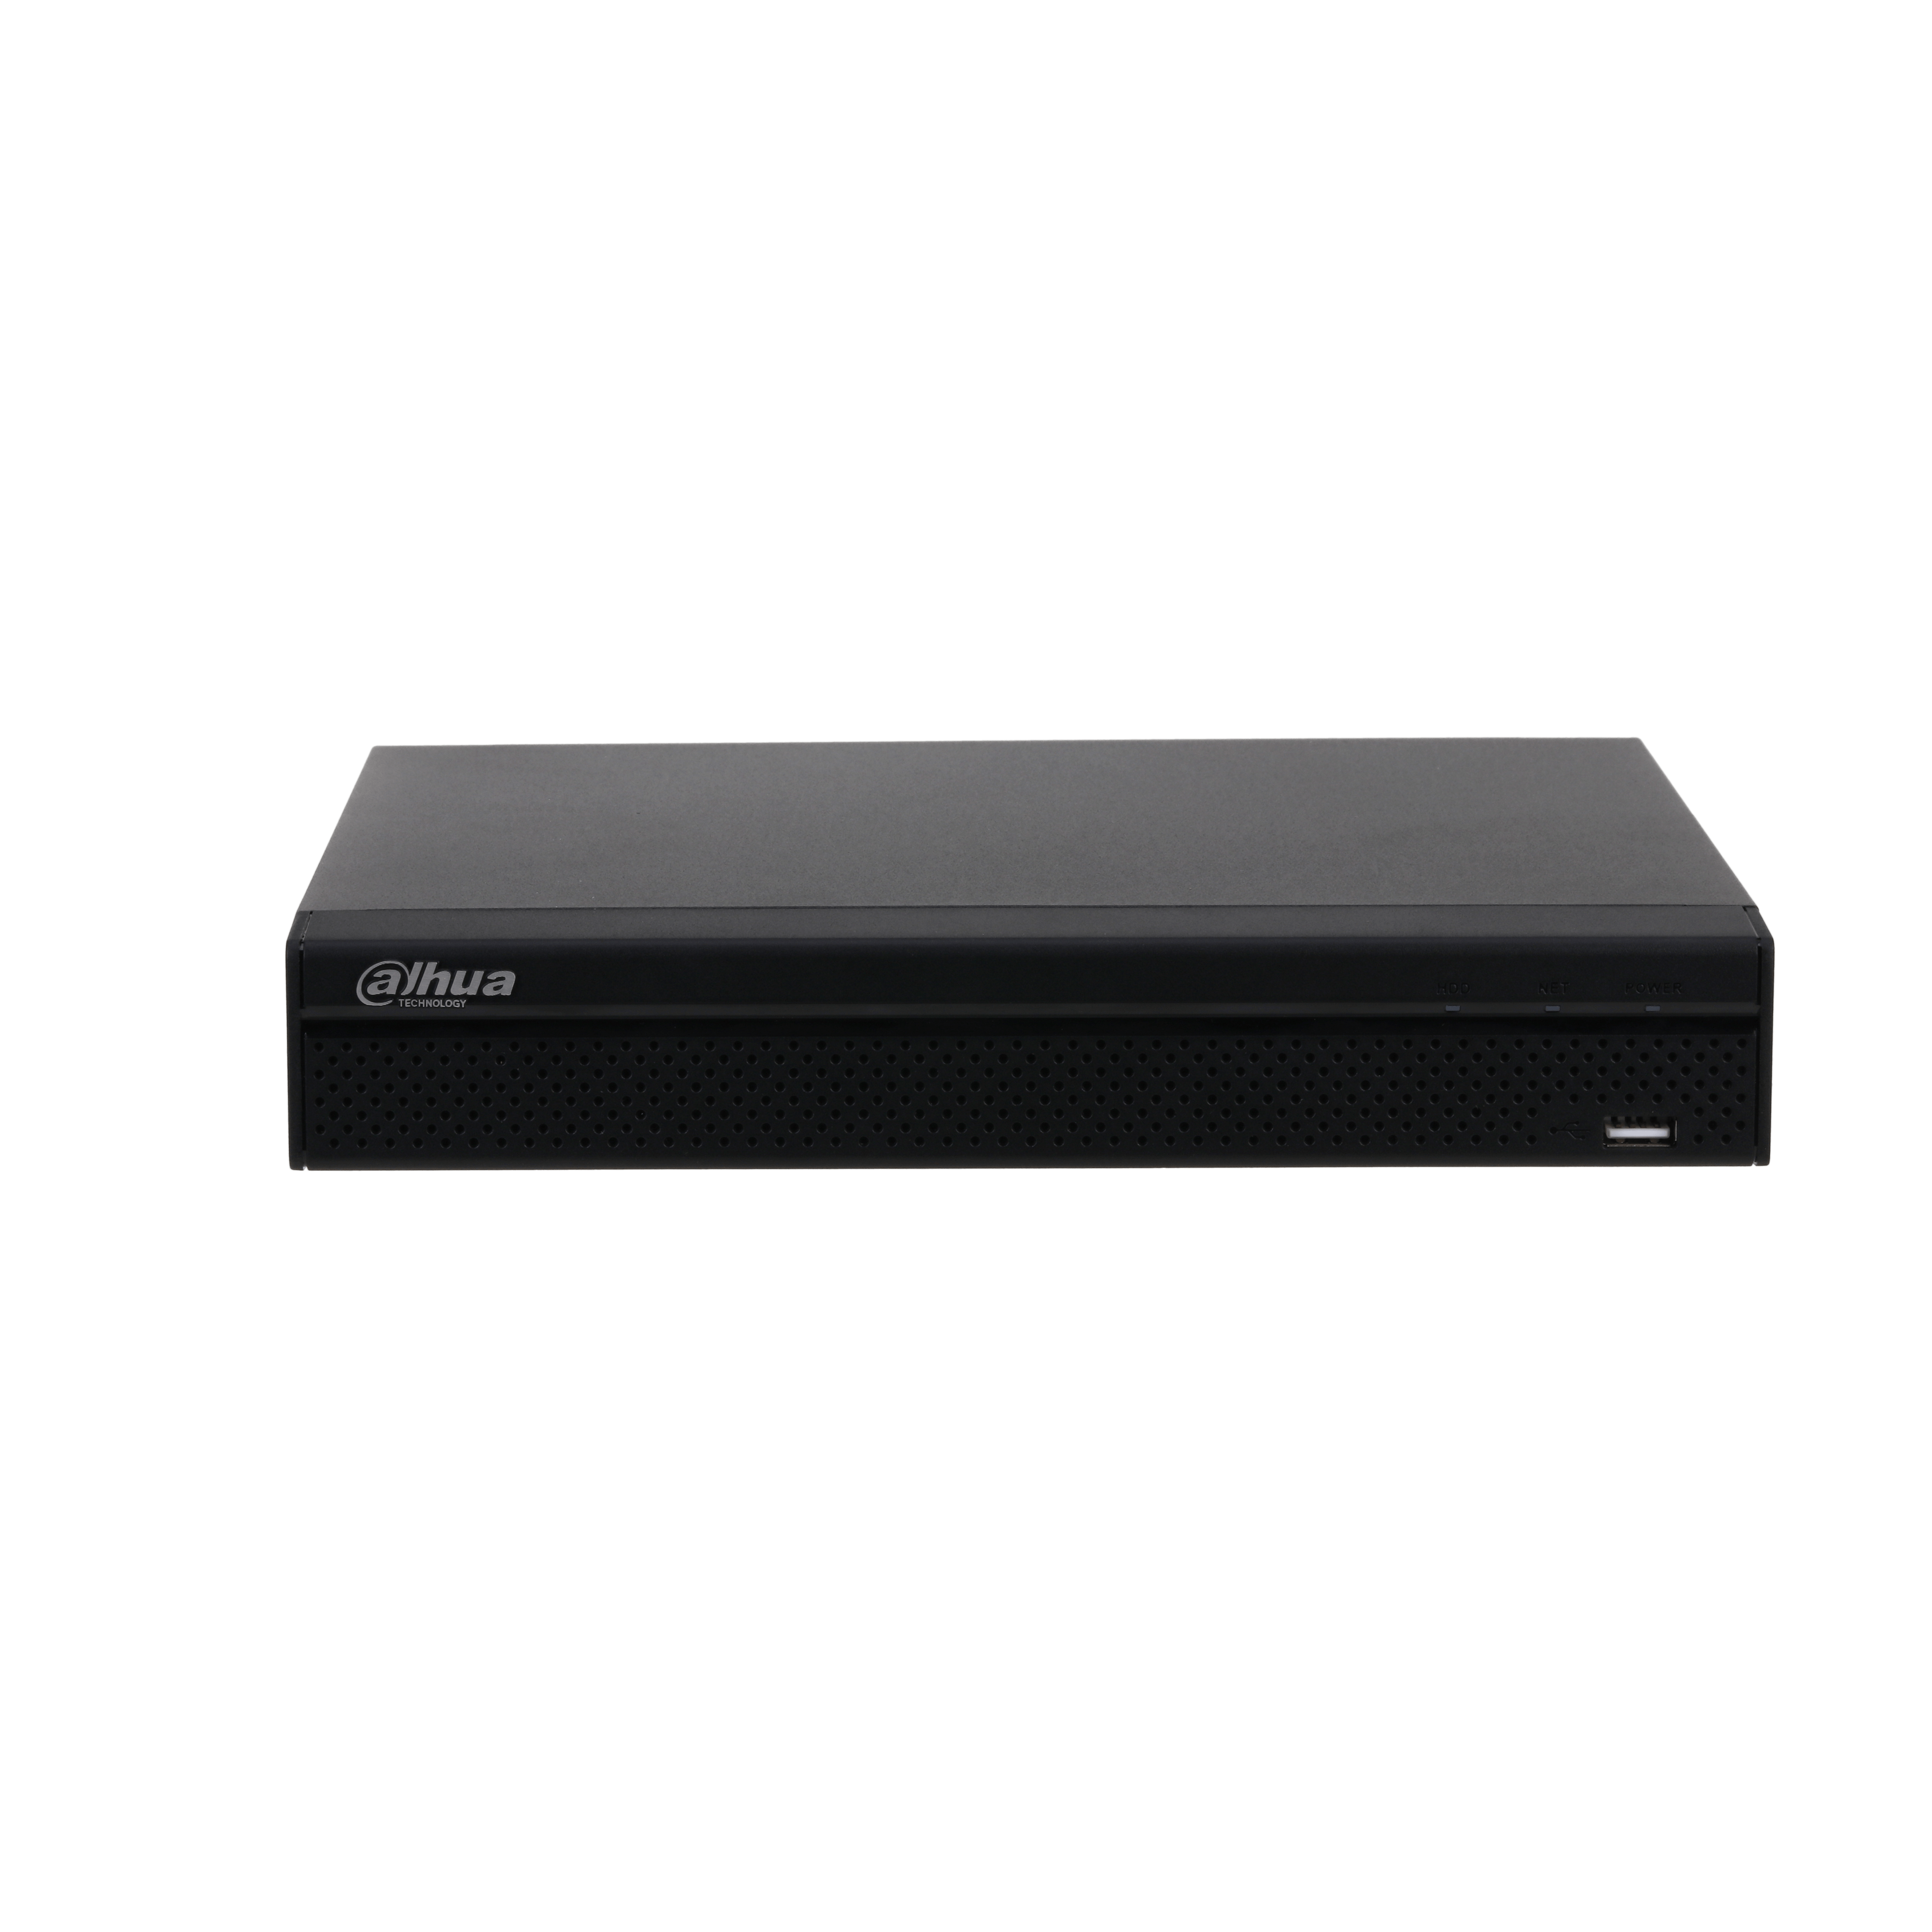 DHI-NVR4108HS-8P-4KS2/L - Dahua - 8 Channel Compact 1HDD 1U 8PoE Network Video Recorder - 0